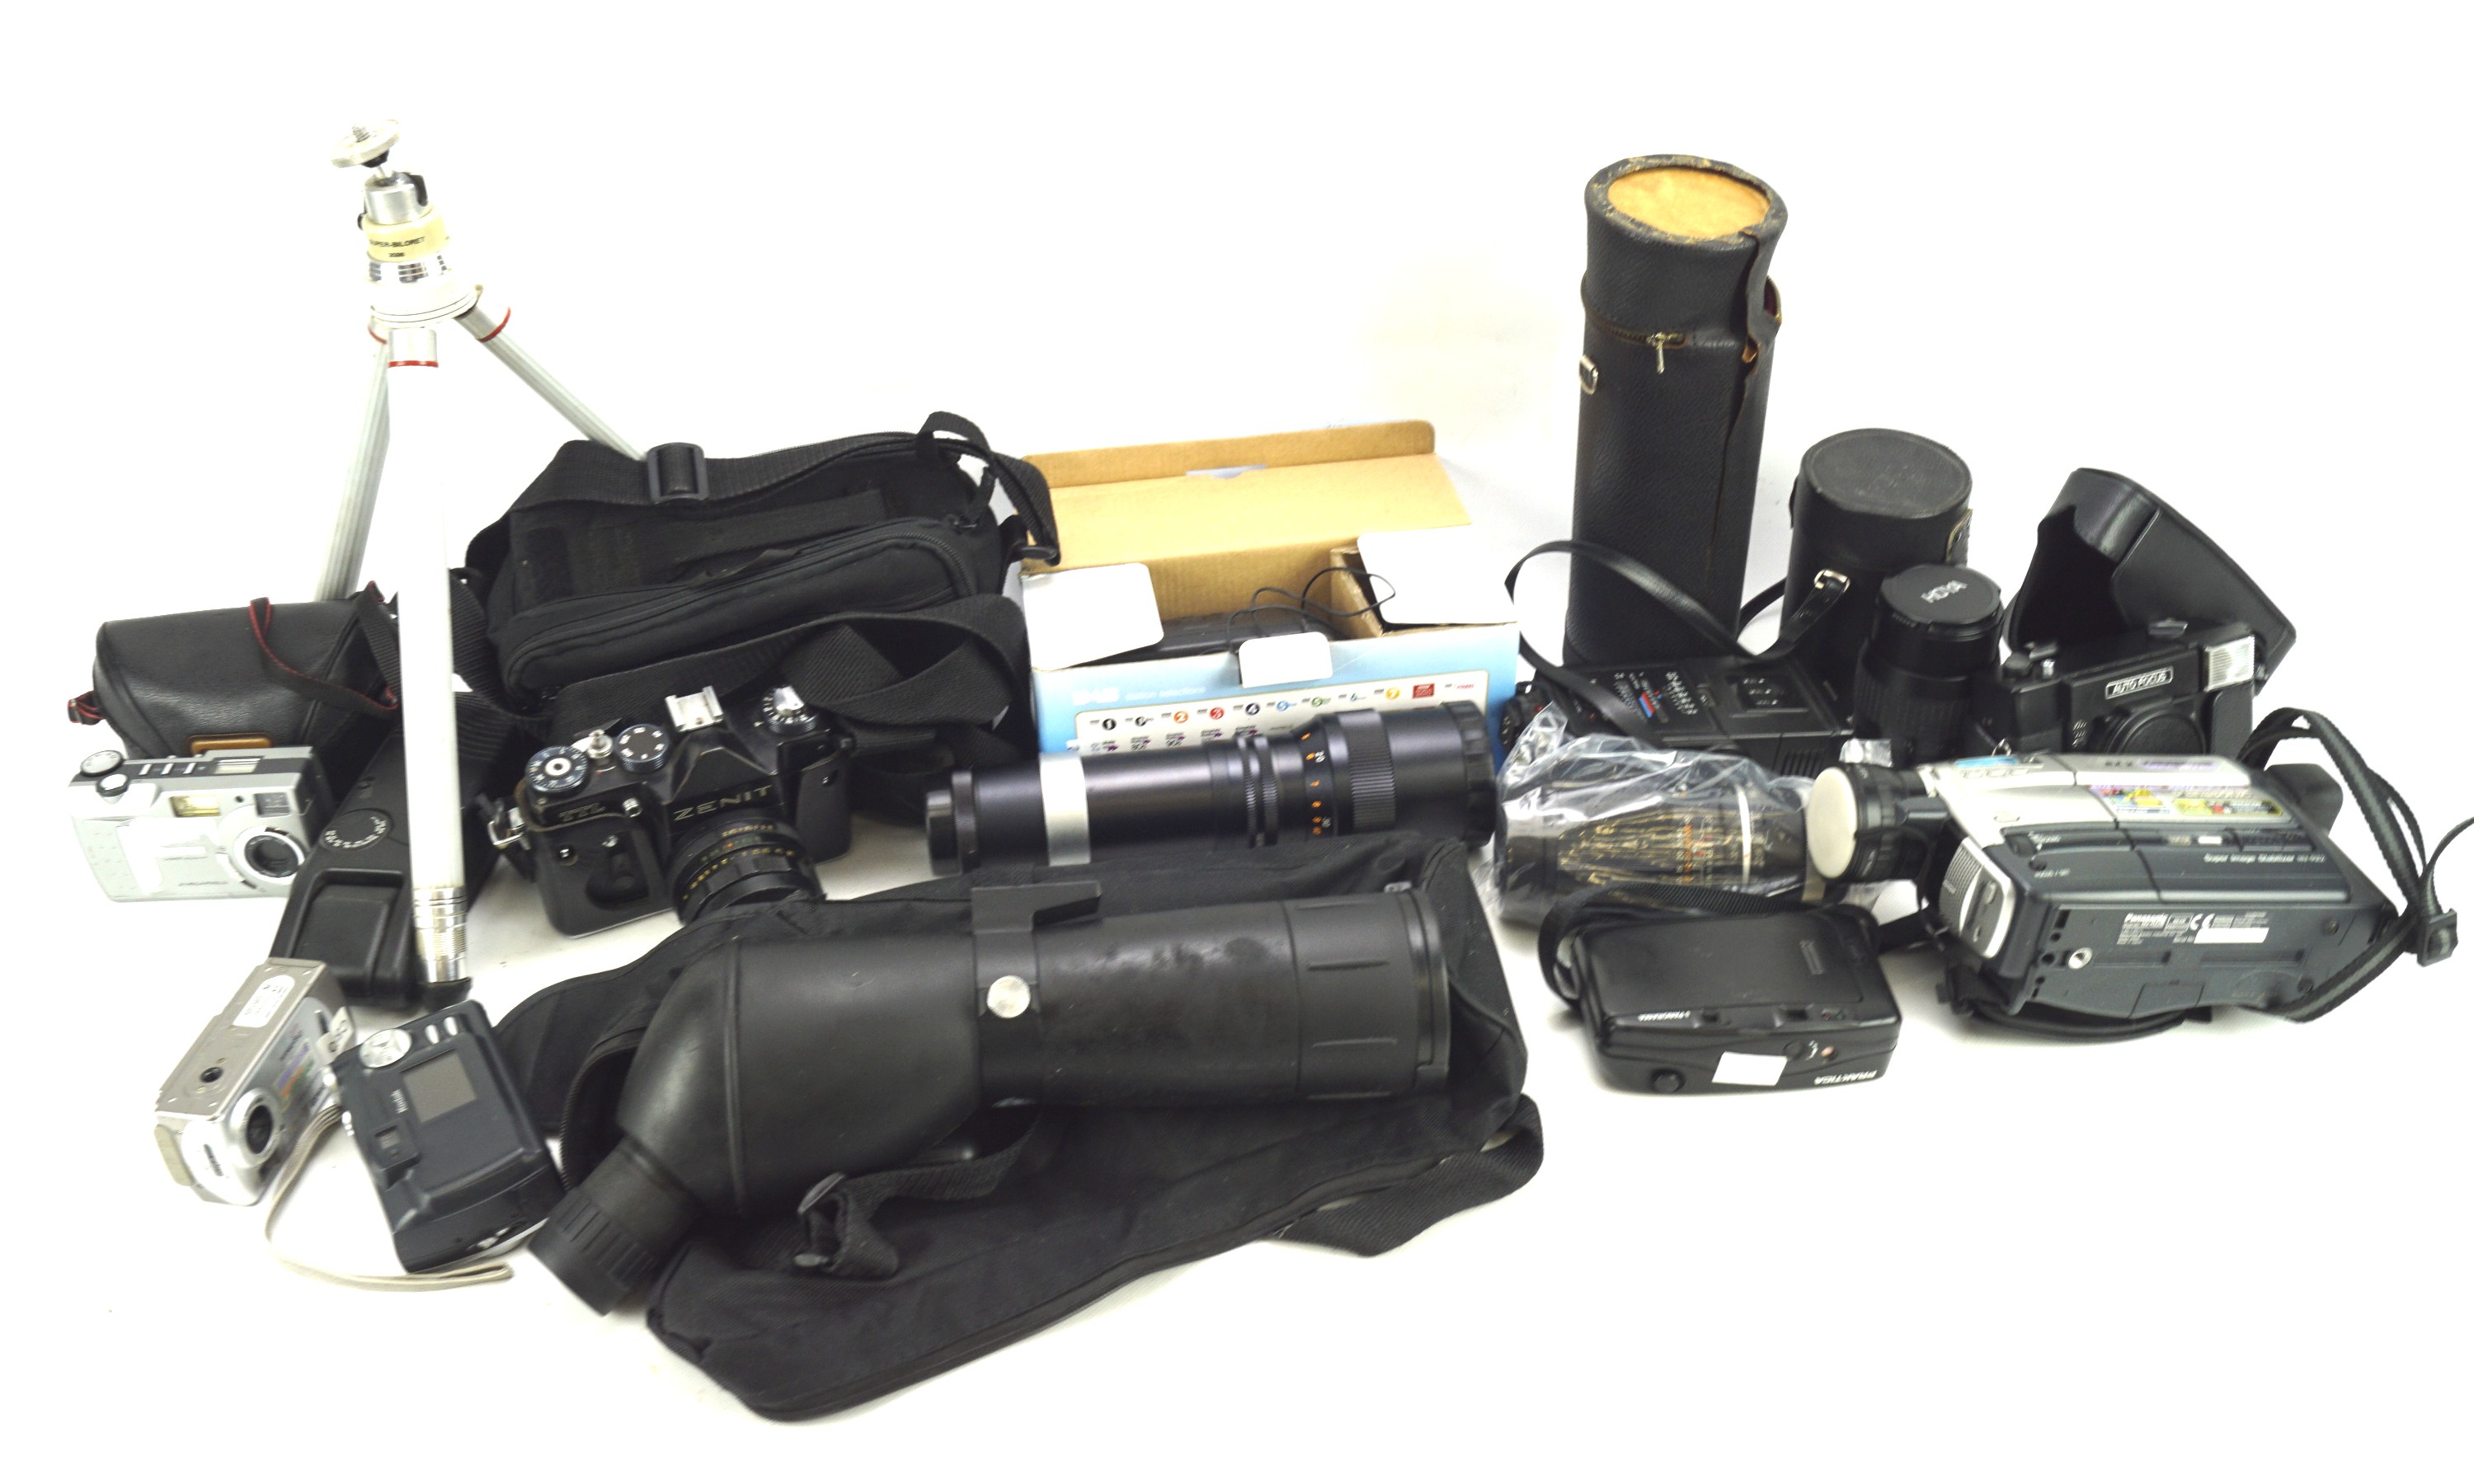 An assortment of cameras and accessories. Including a Zenit 35mm camera, tripod, Prinzgalaxy no.